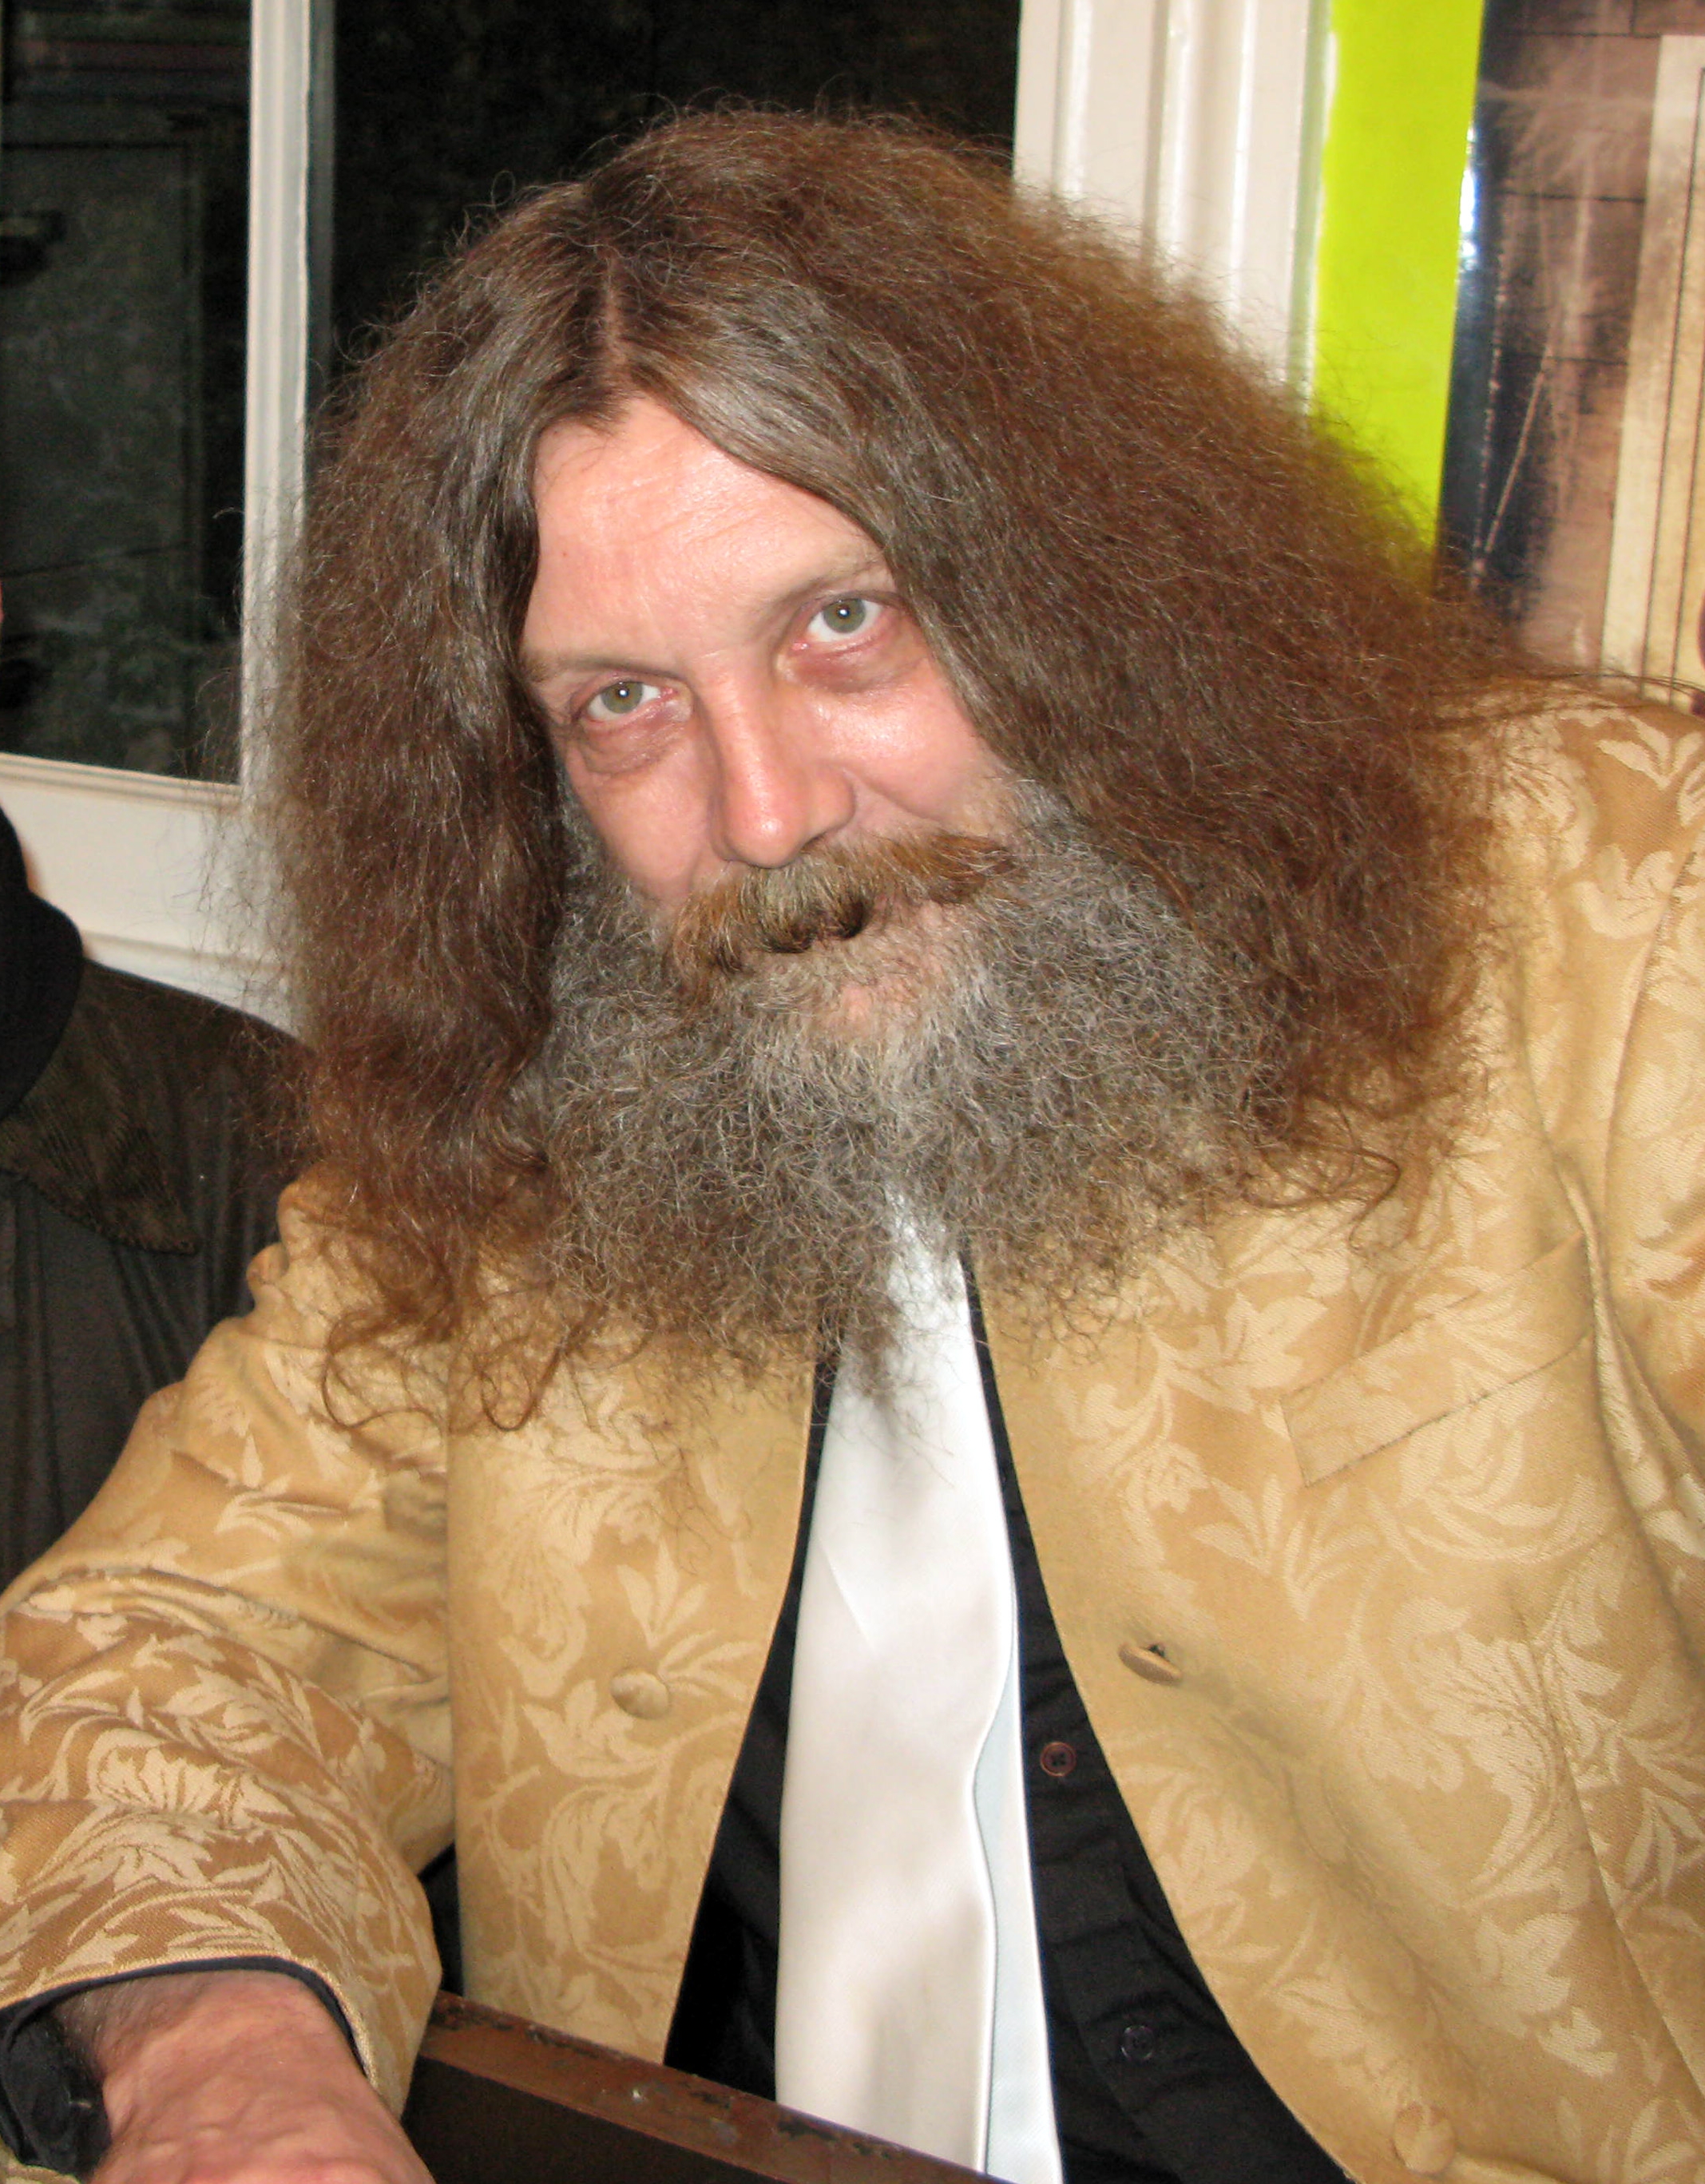 Picture of Alan Moore Used for Editorial Purposes only